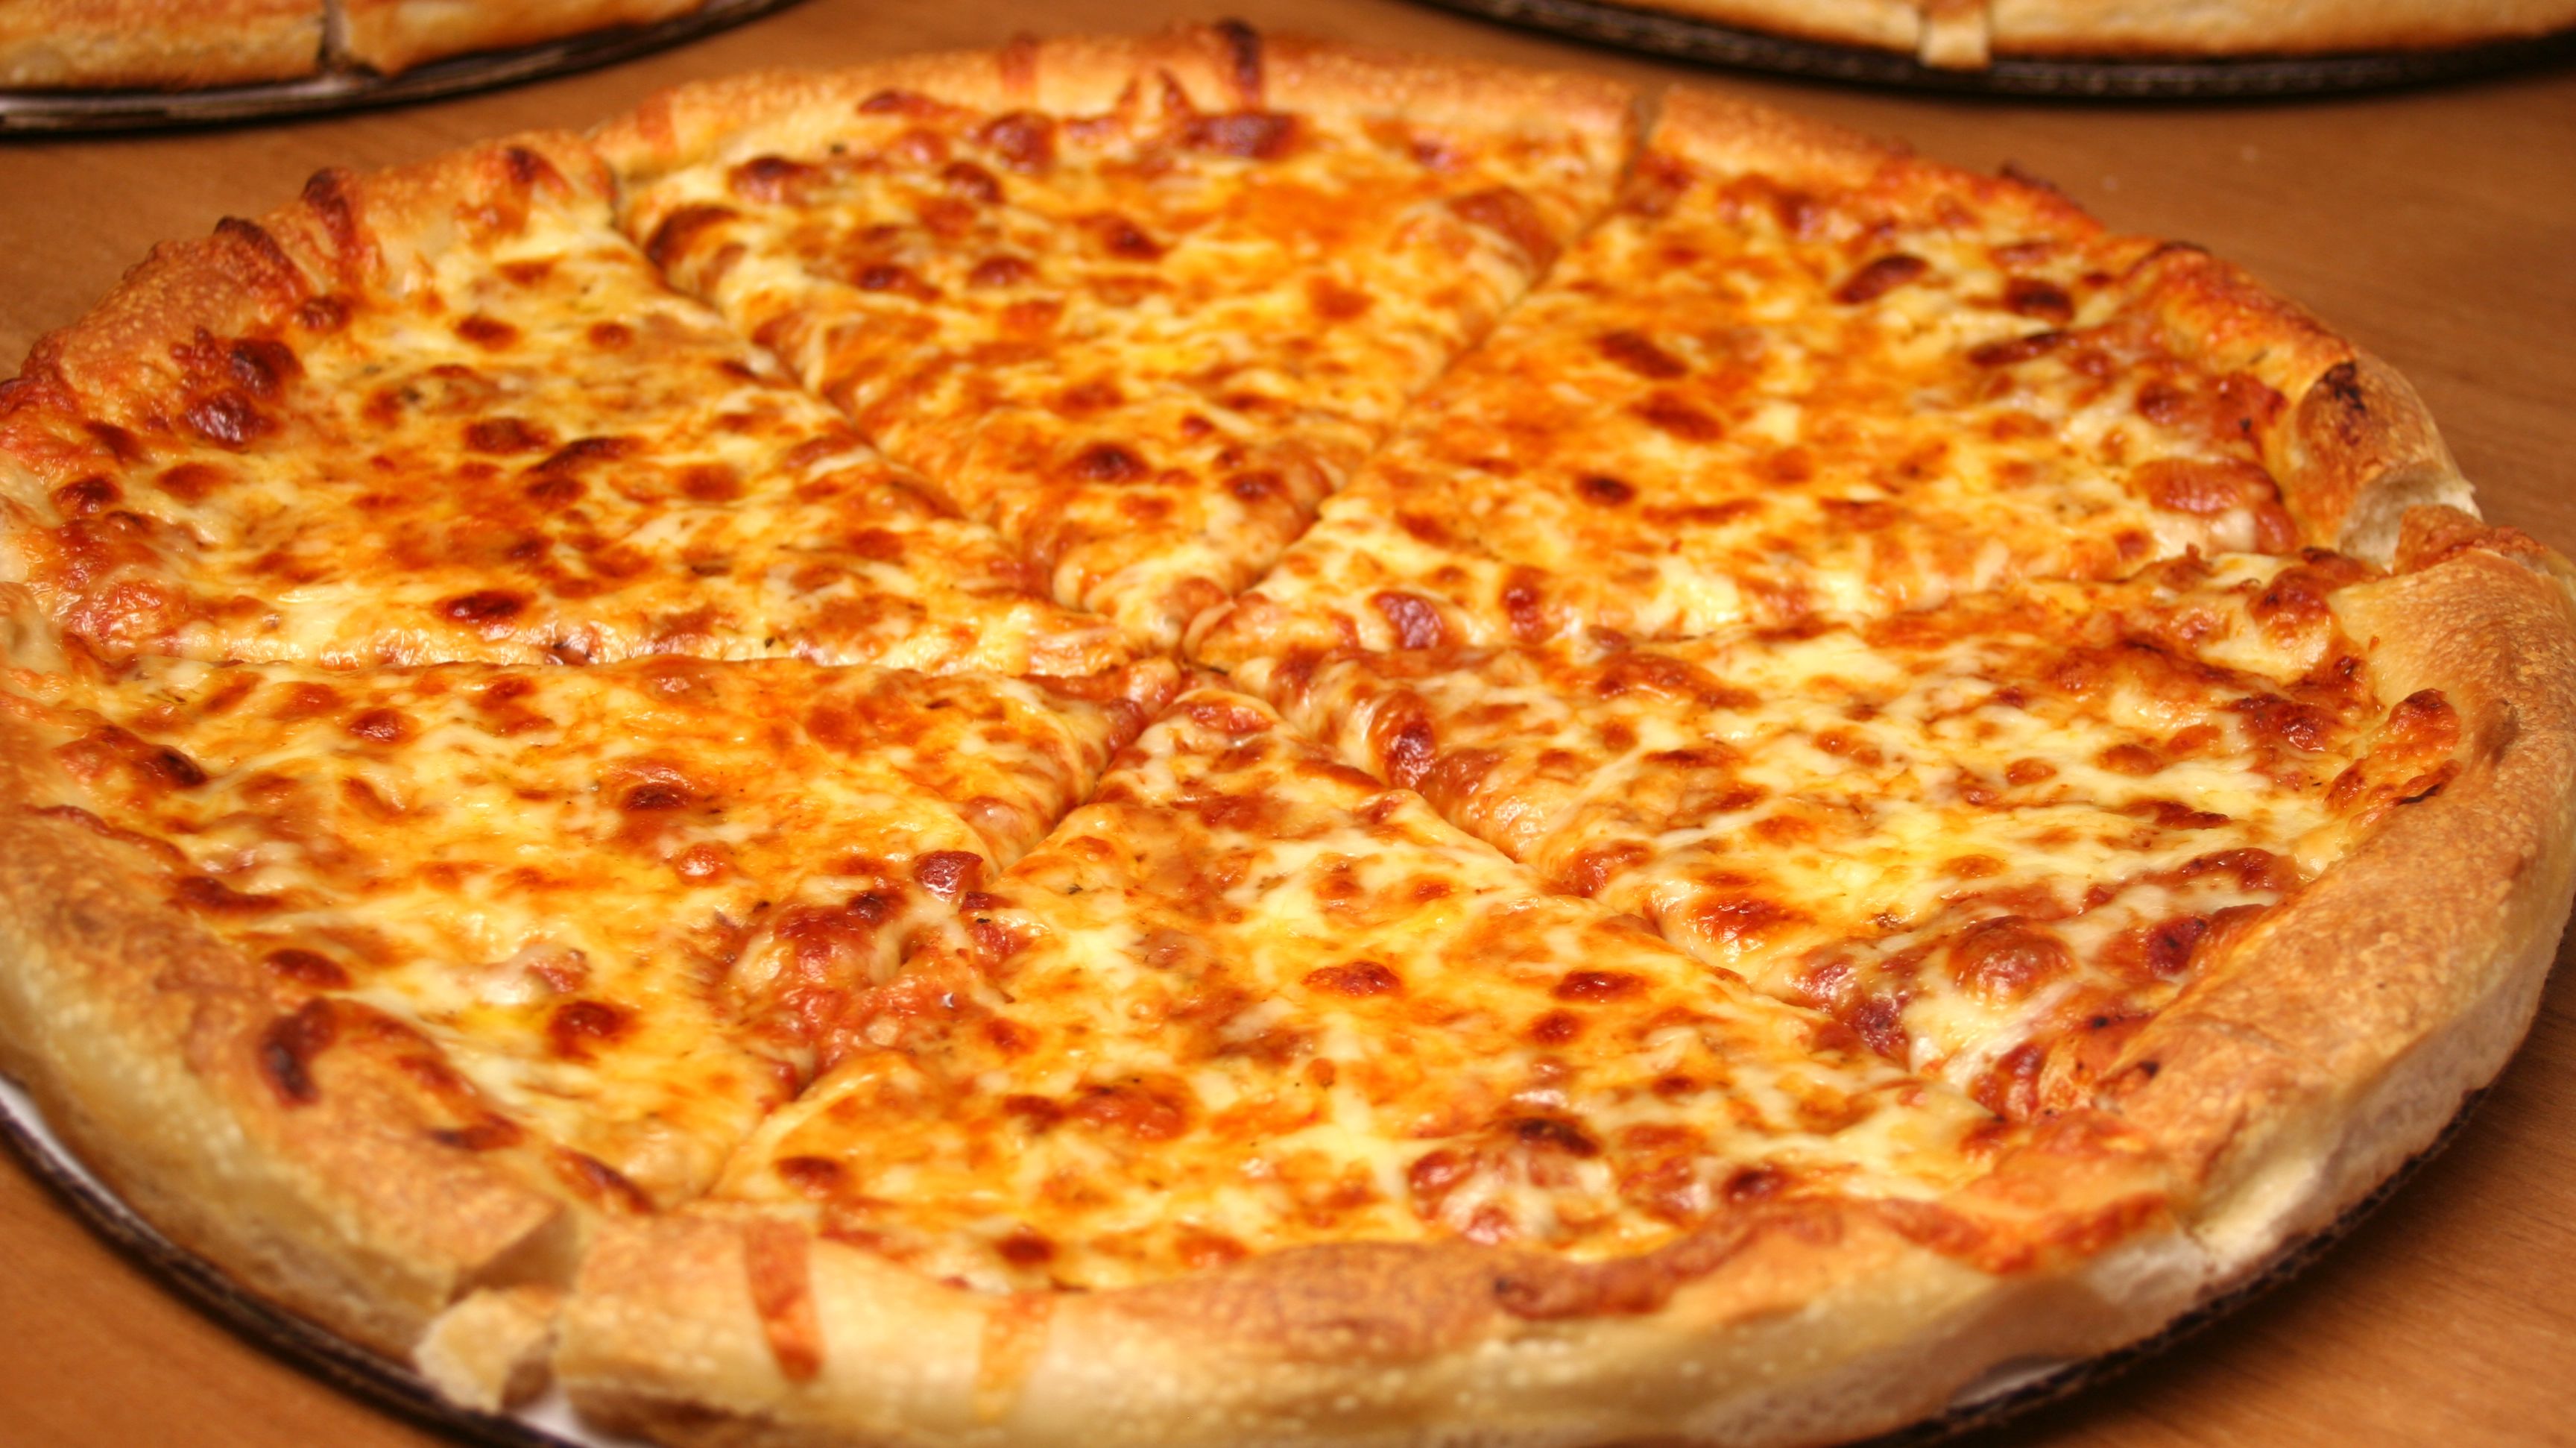 Want More Pizza in Your Life? Order One 18Inch Pie Instead of Two 12